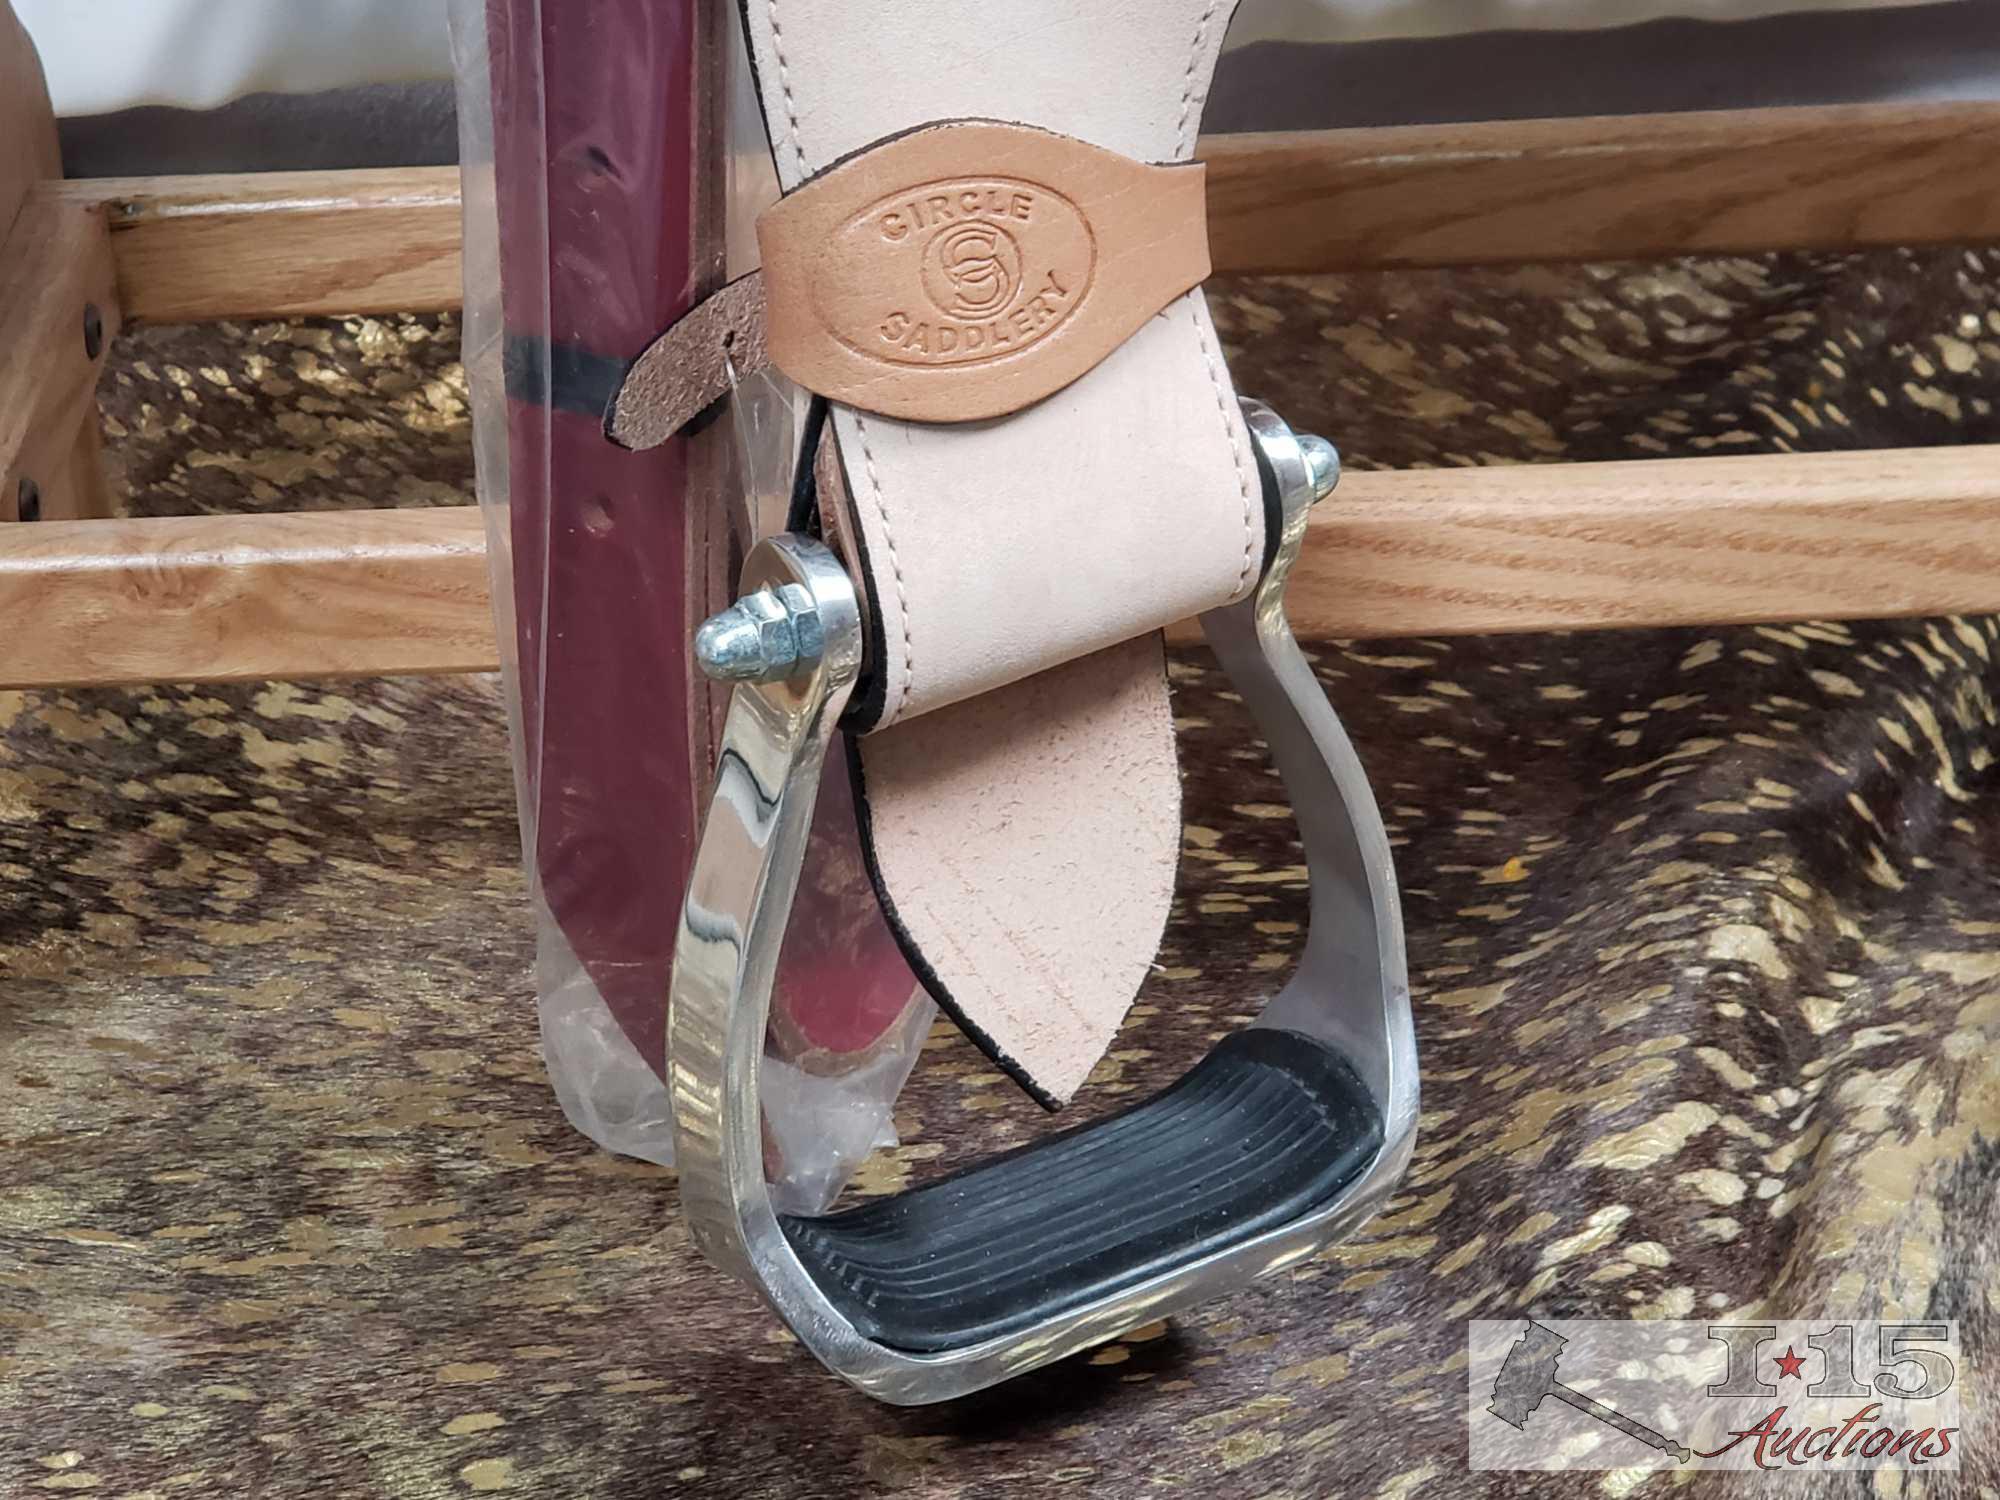 15" NEW Barrel Saddle with Feather Concho Design & Limited Warranty Card